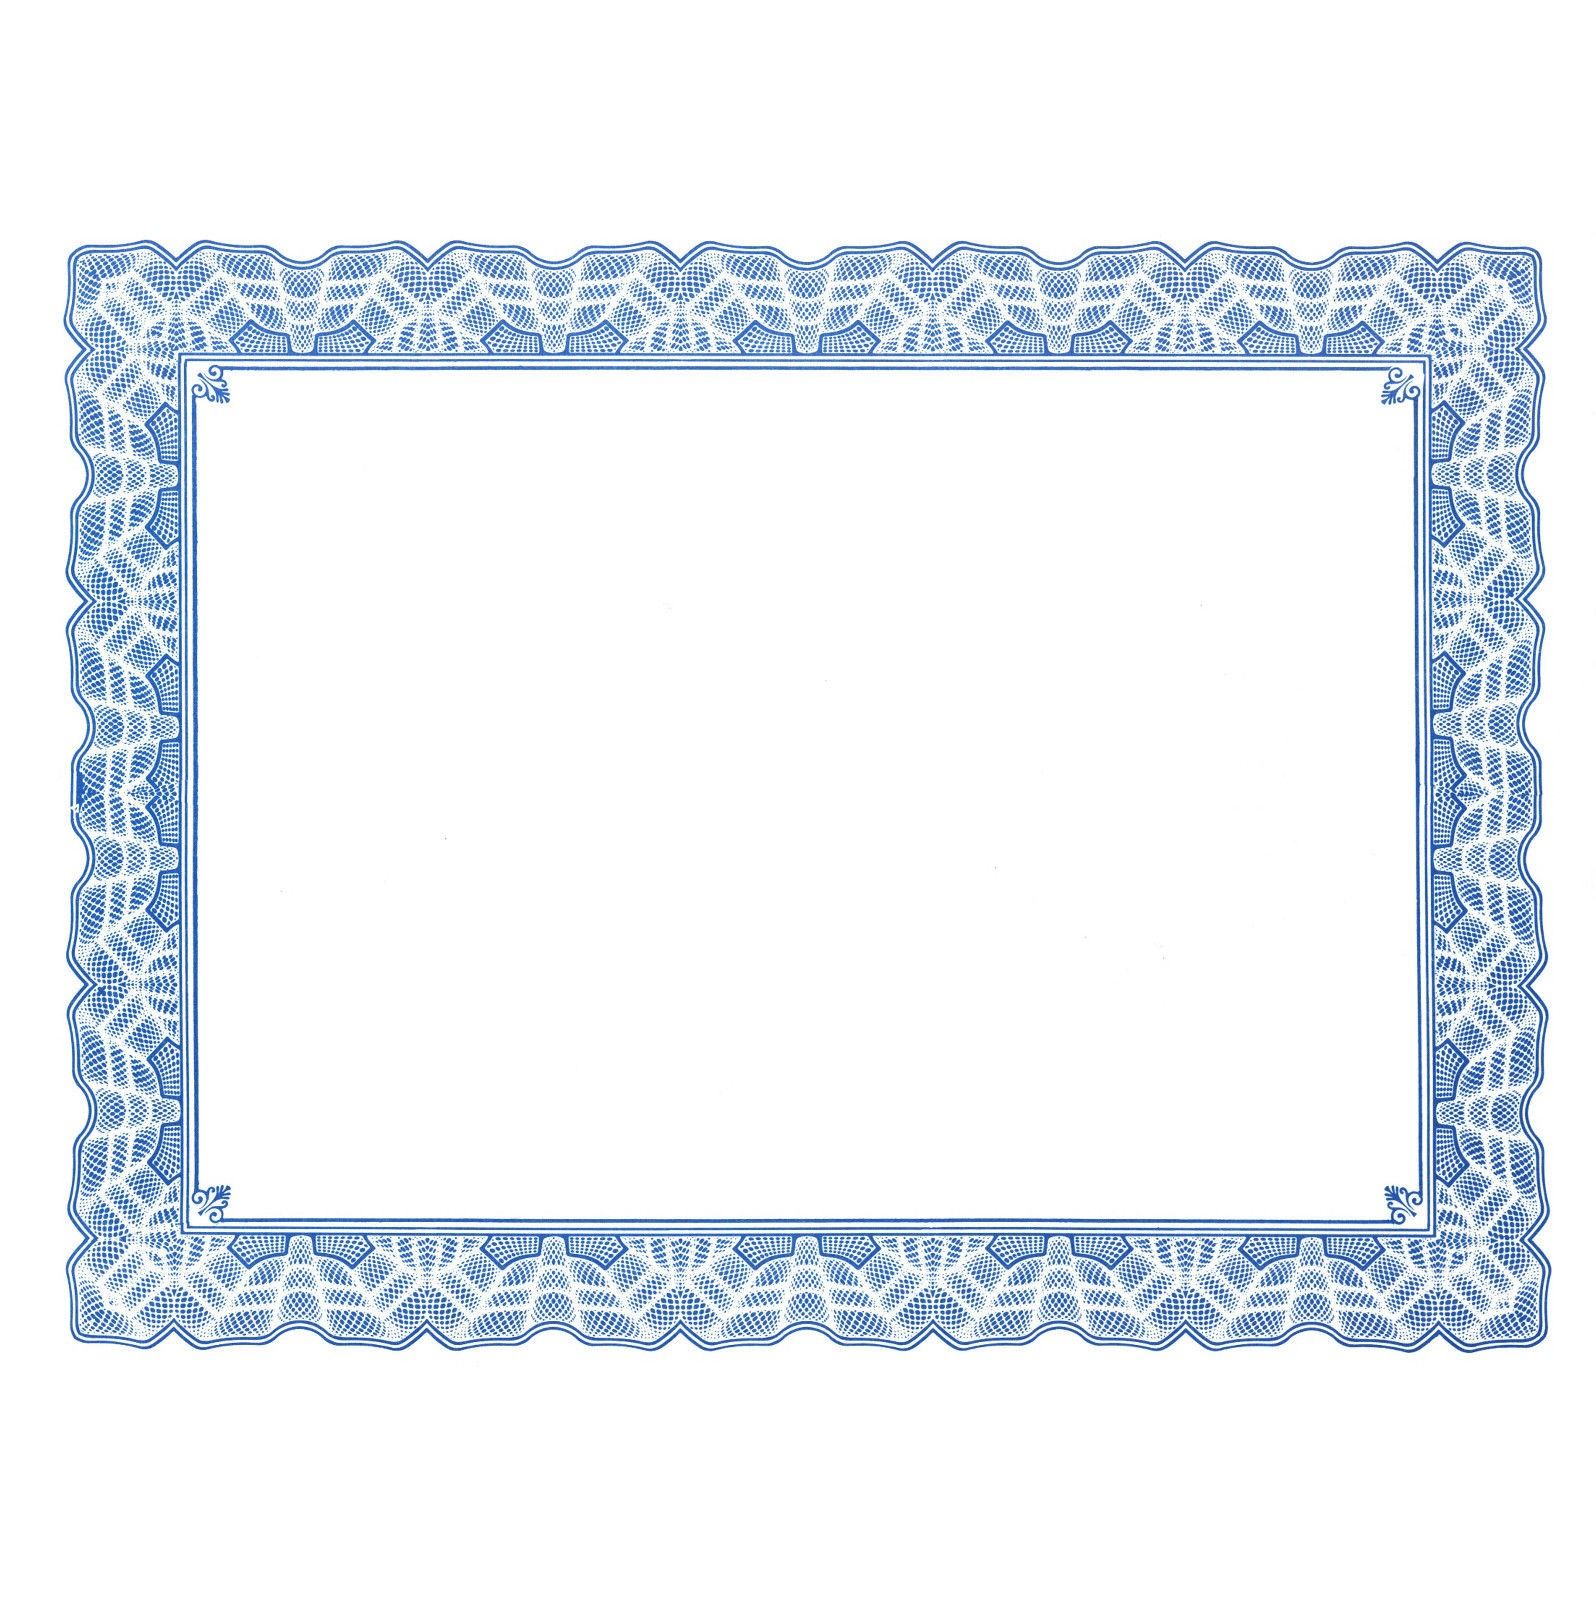 Free Certificate Border For Word. Best123. Certificate border, Border , Free printable certificates